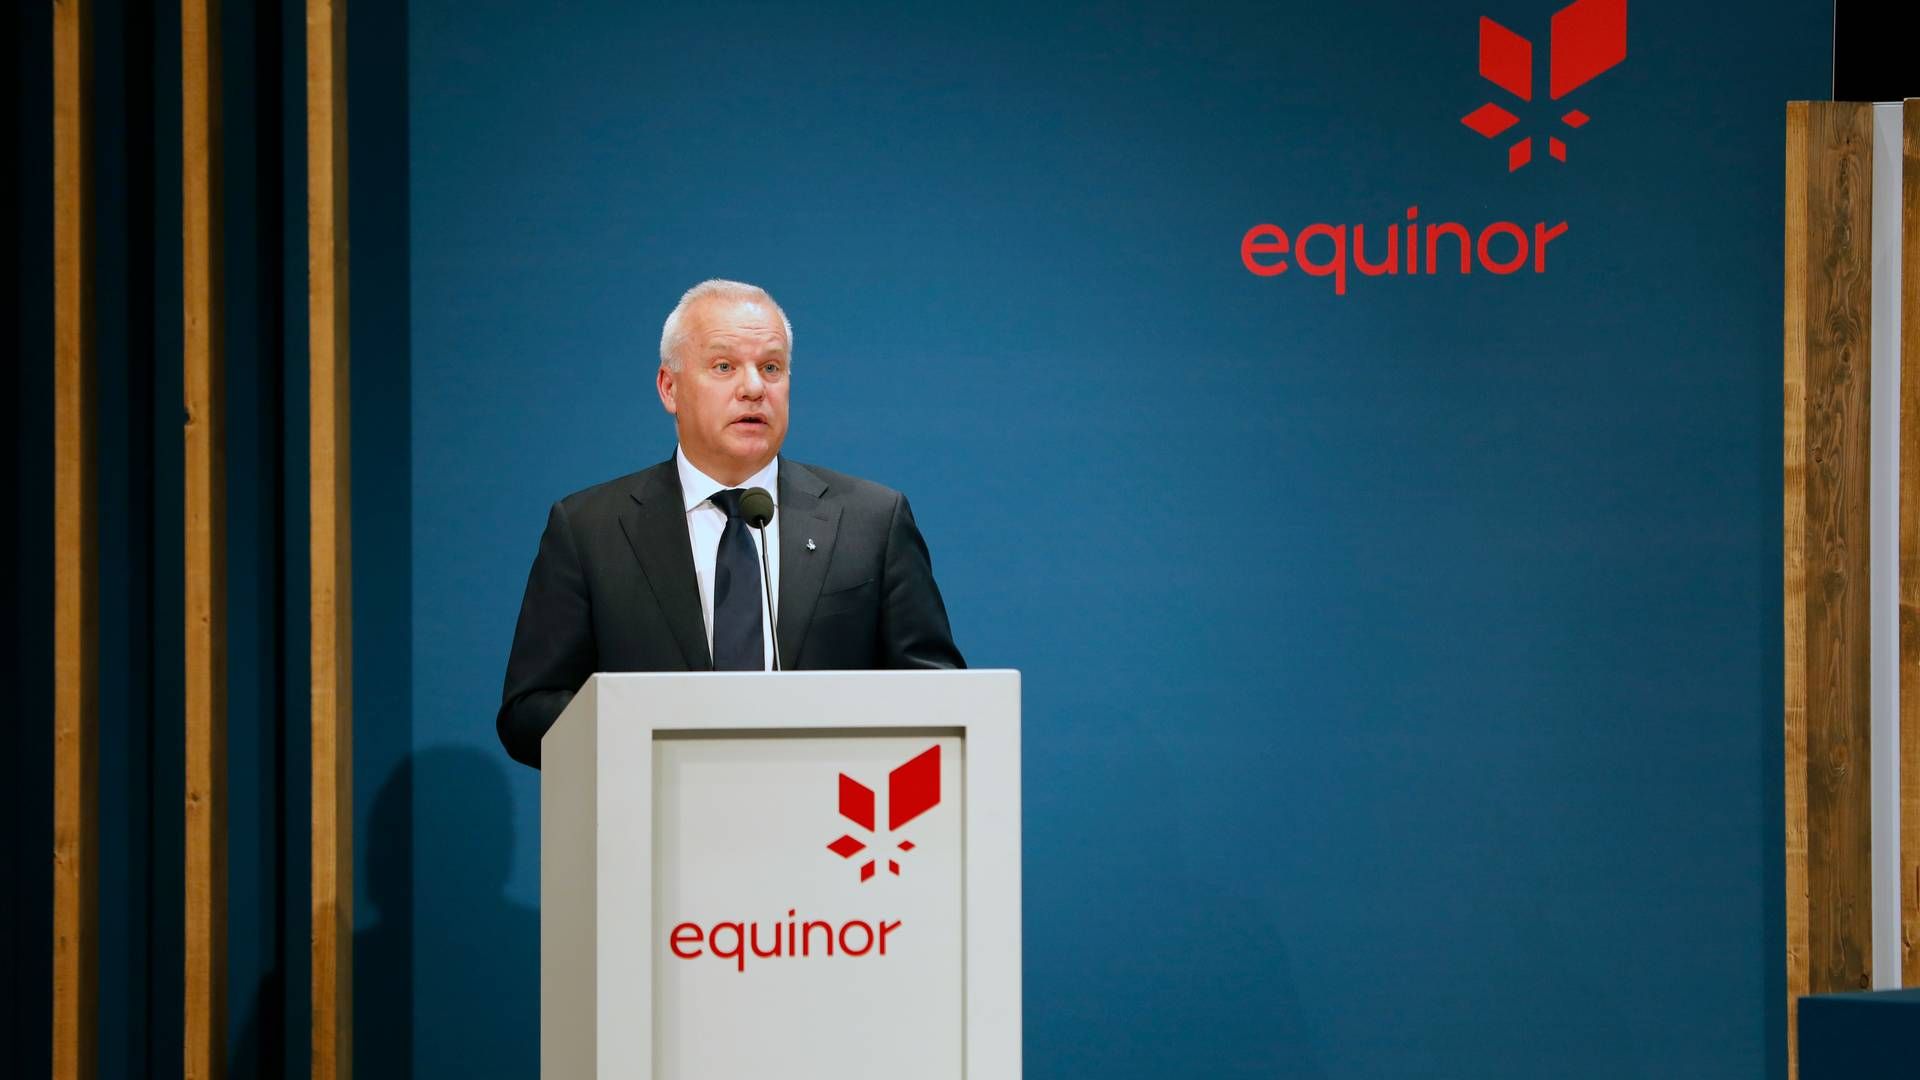 Equinor maintains its investment in offshore wind and its target of 12-16GW installed renewable power generation, but sees that solar and onshore wind can cover part of the target, says CEO Anders Opedal. | Photo: Equinor